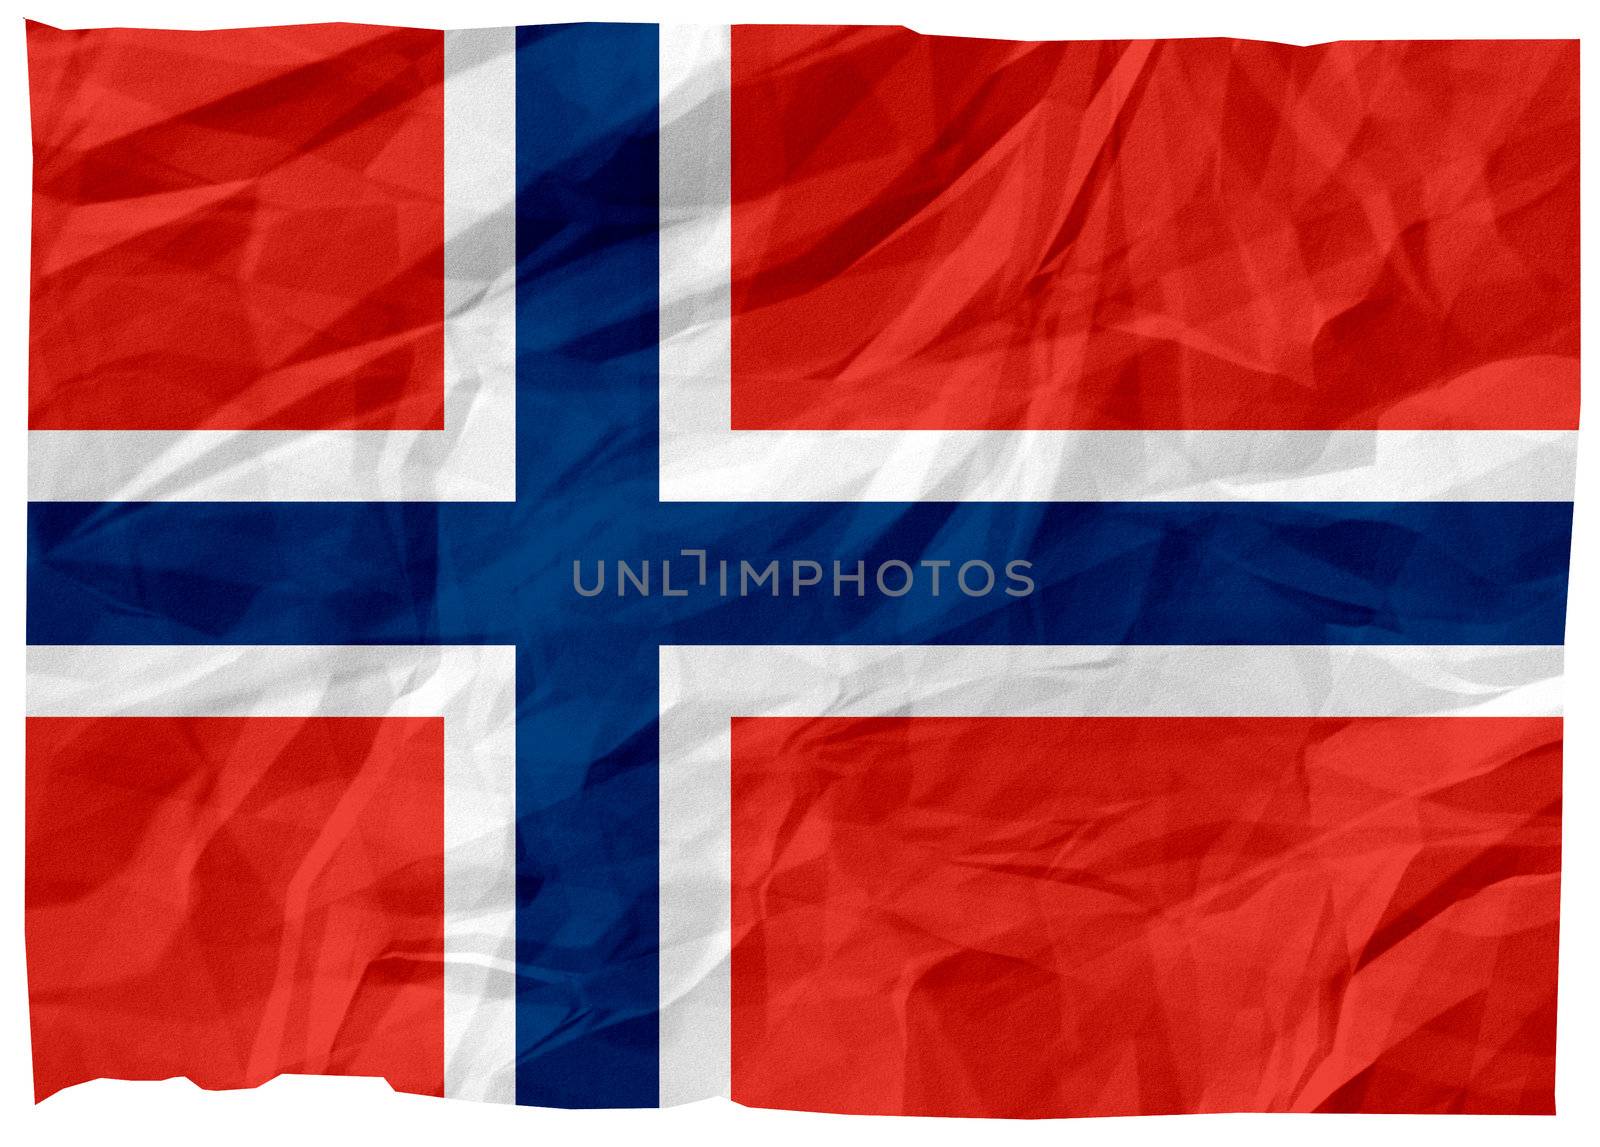 The national flag of Norway (Europe).